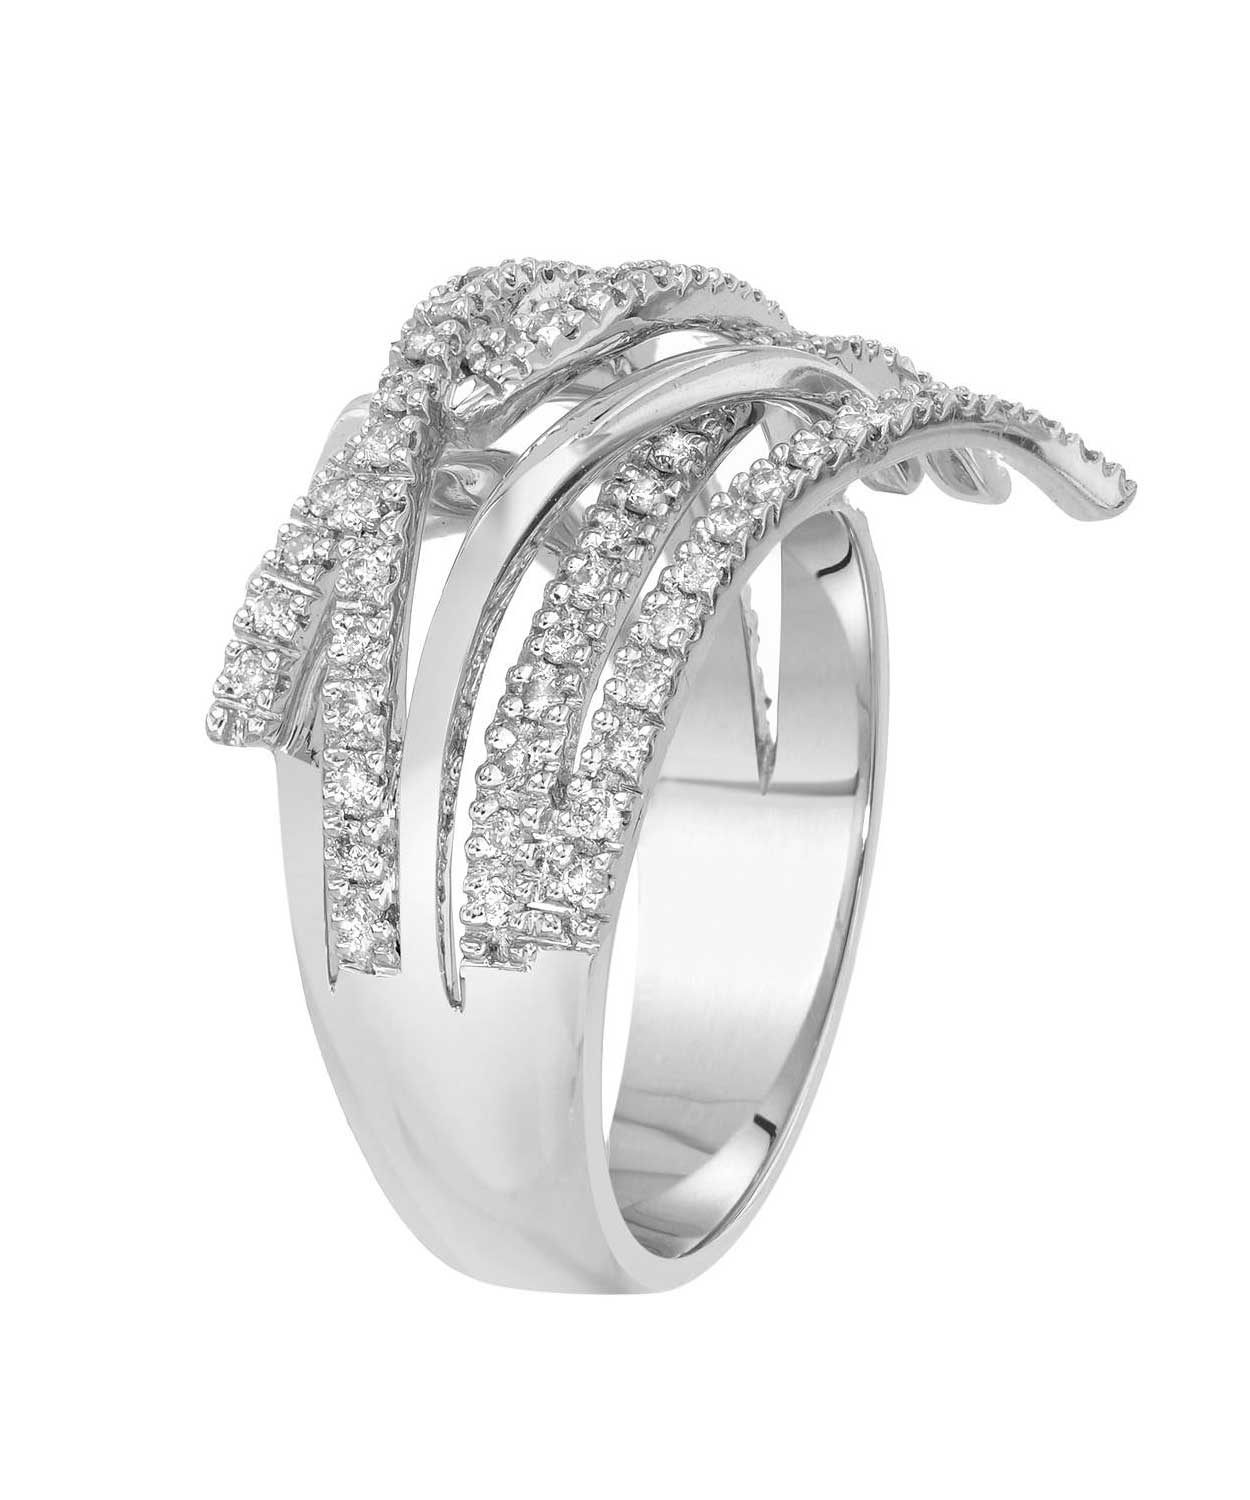 Allure Collection 0.67 ctw Diamond 14k White Gold Contemporary Ring View 2